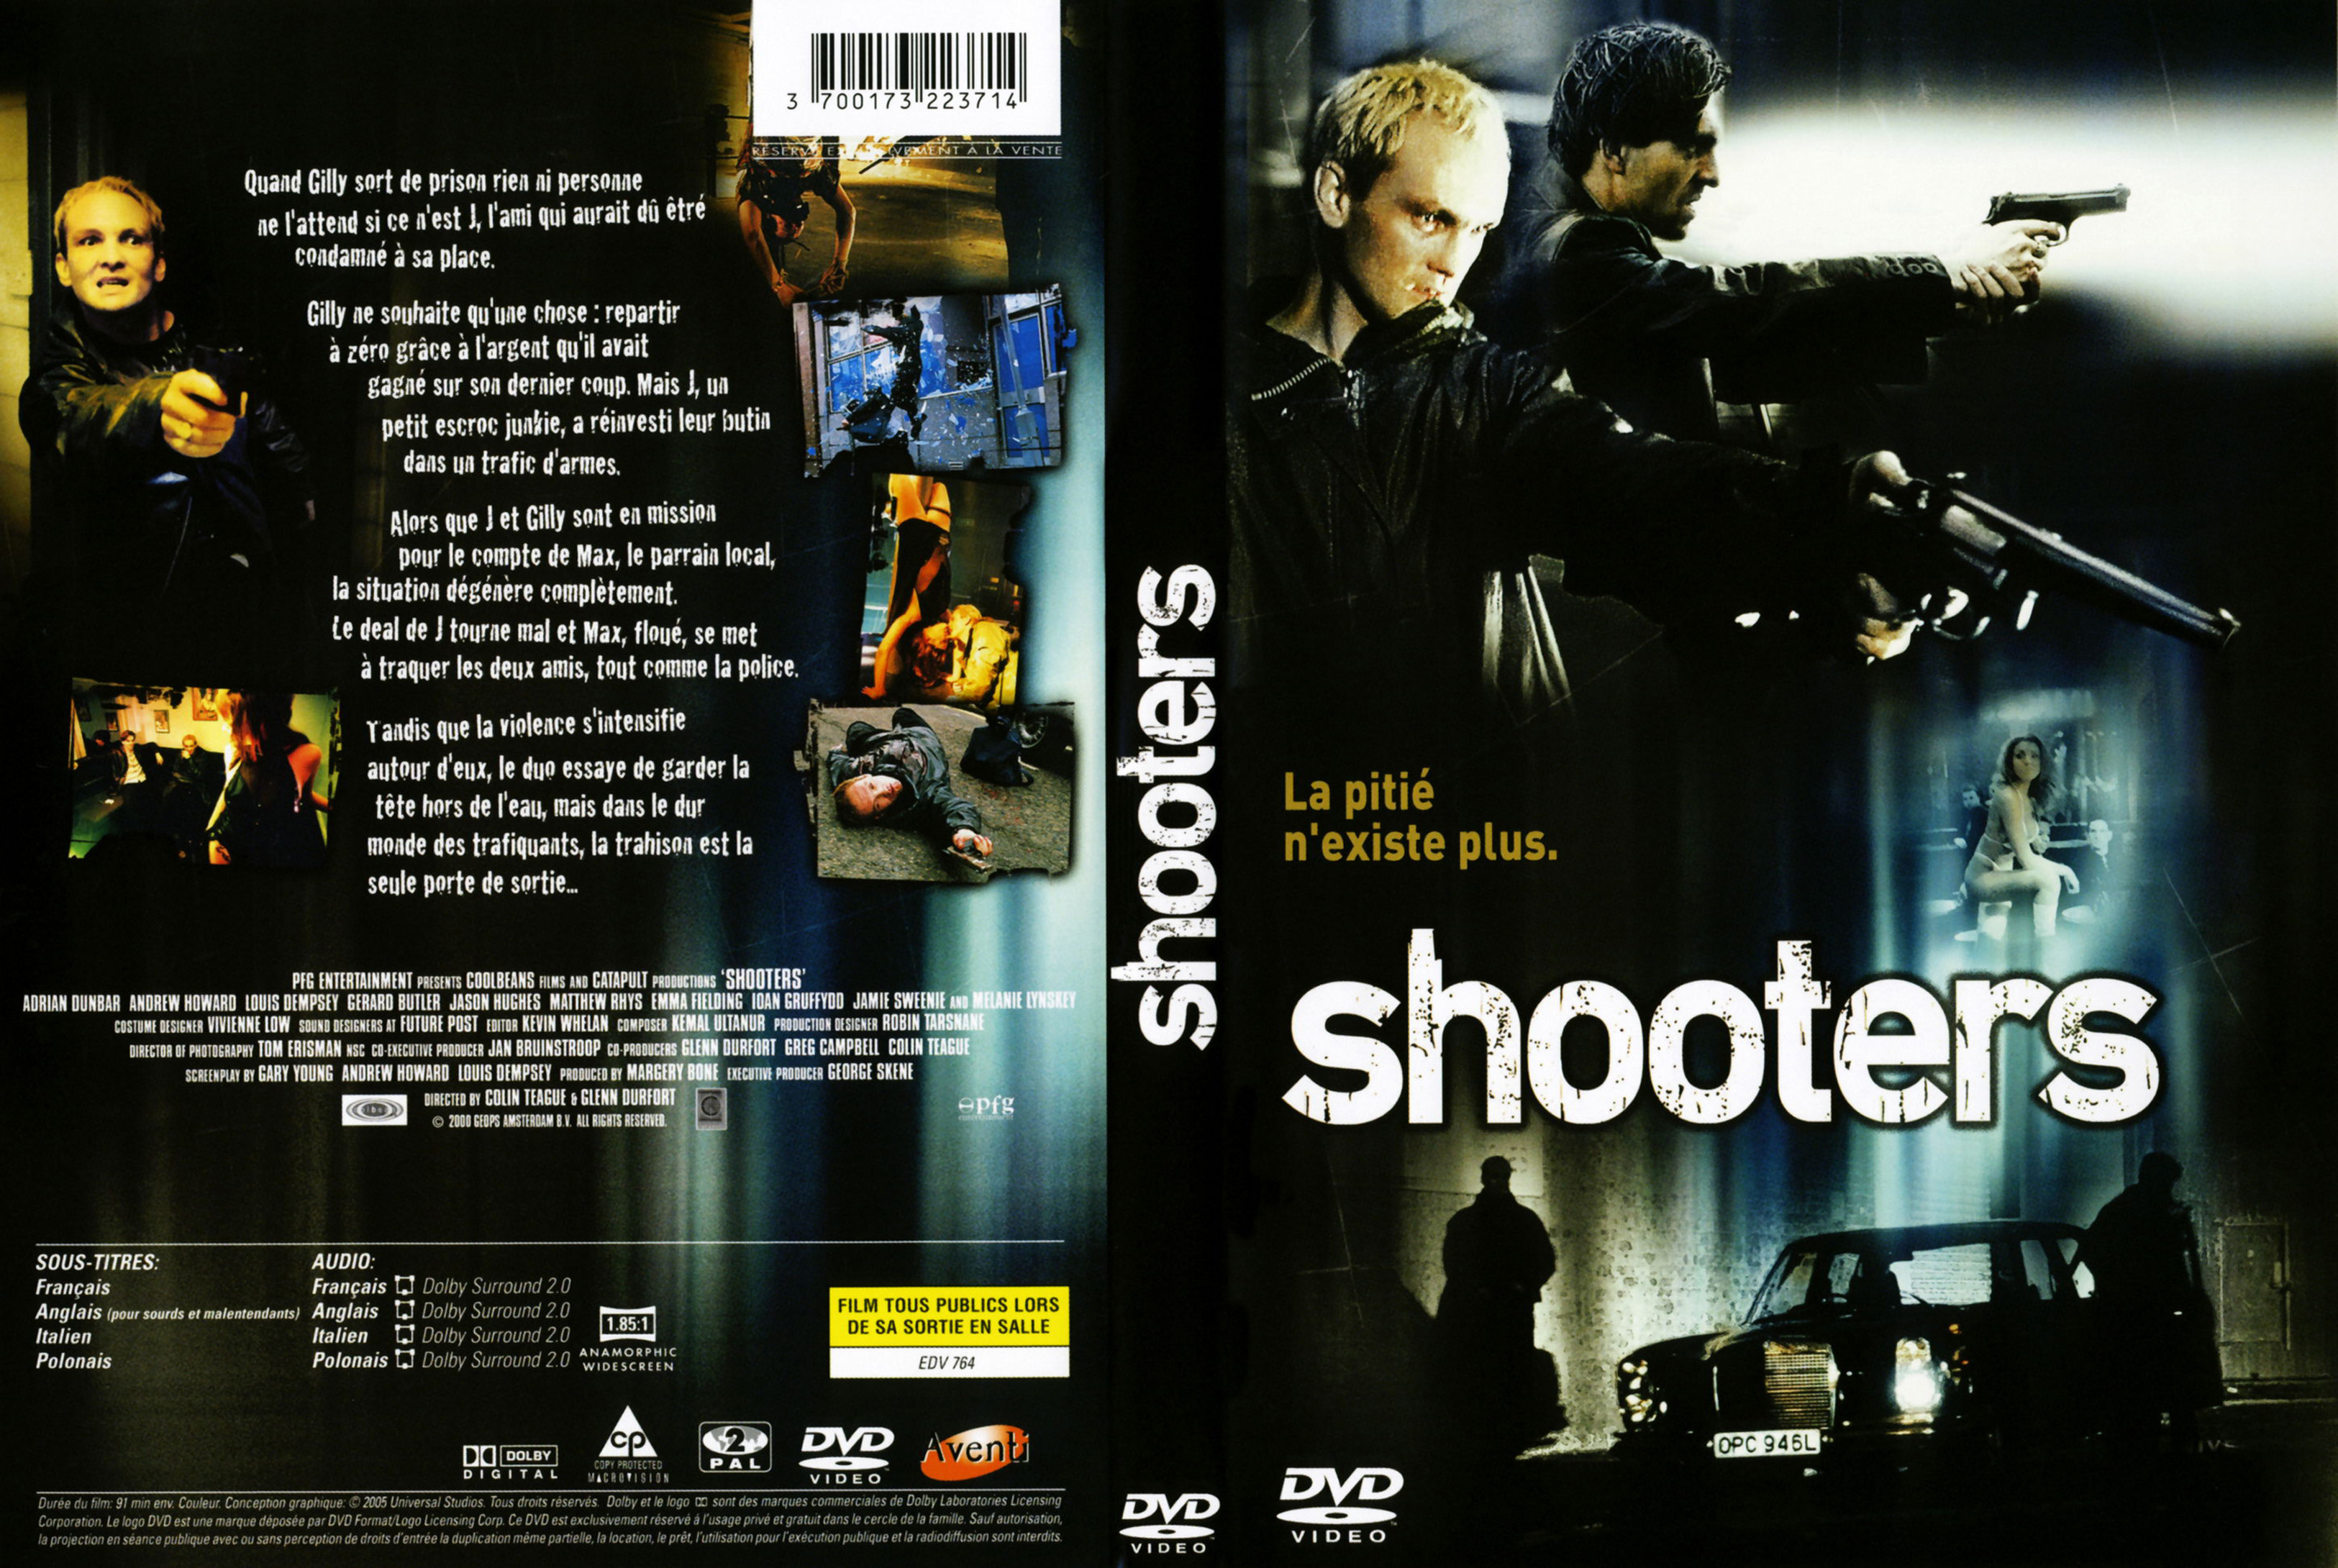 Jaquette DVD Shooters